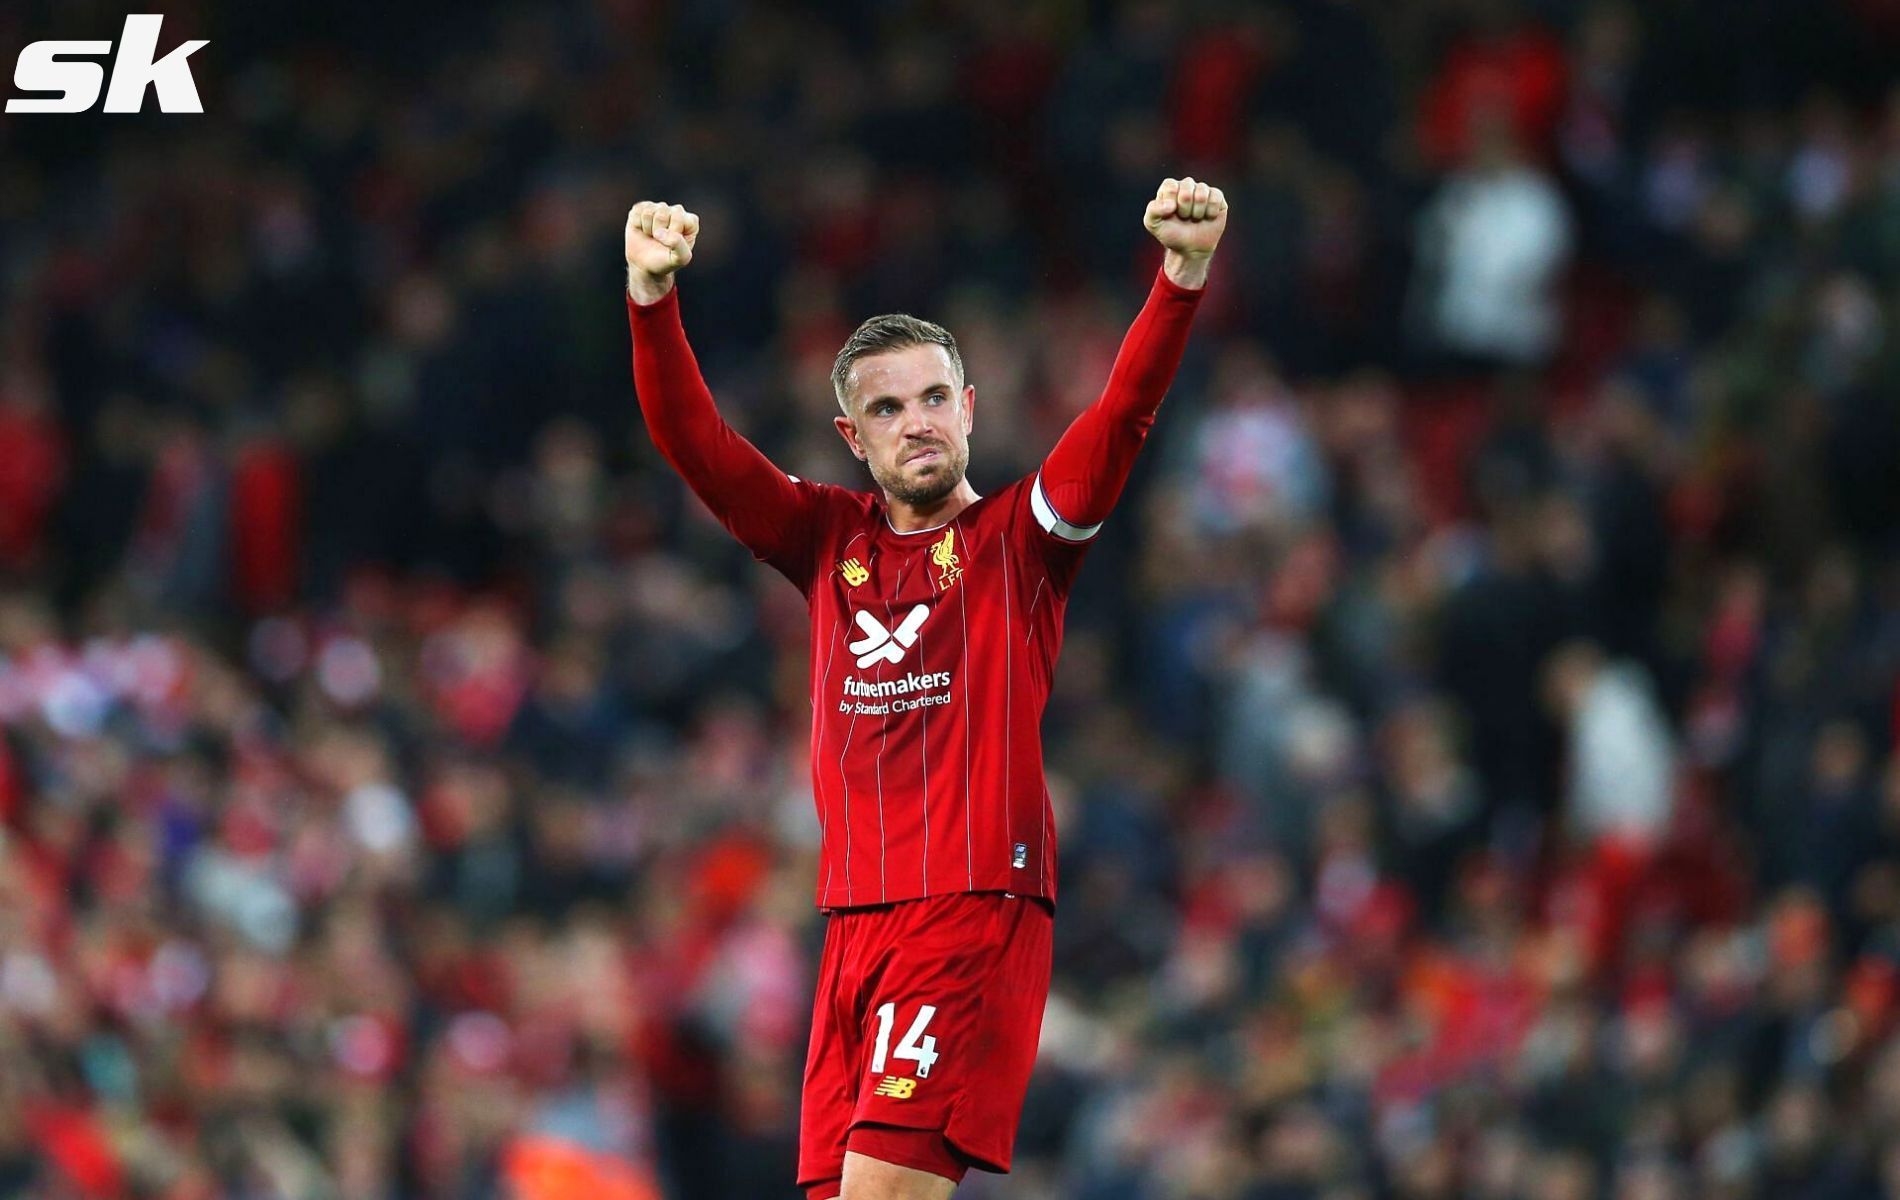 Find out which other captains join Jordan Henderson on the list